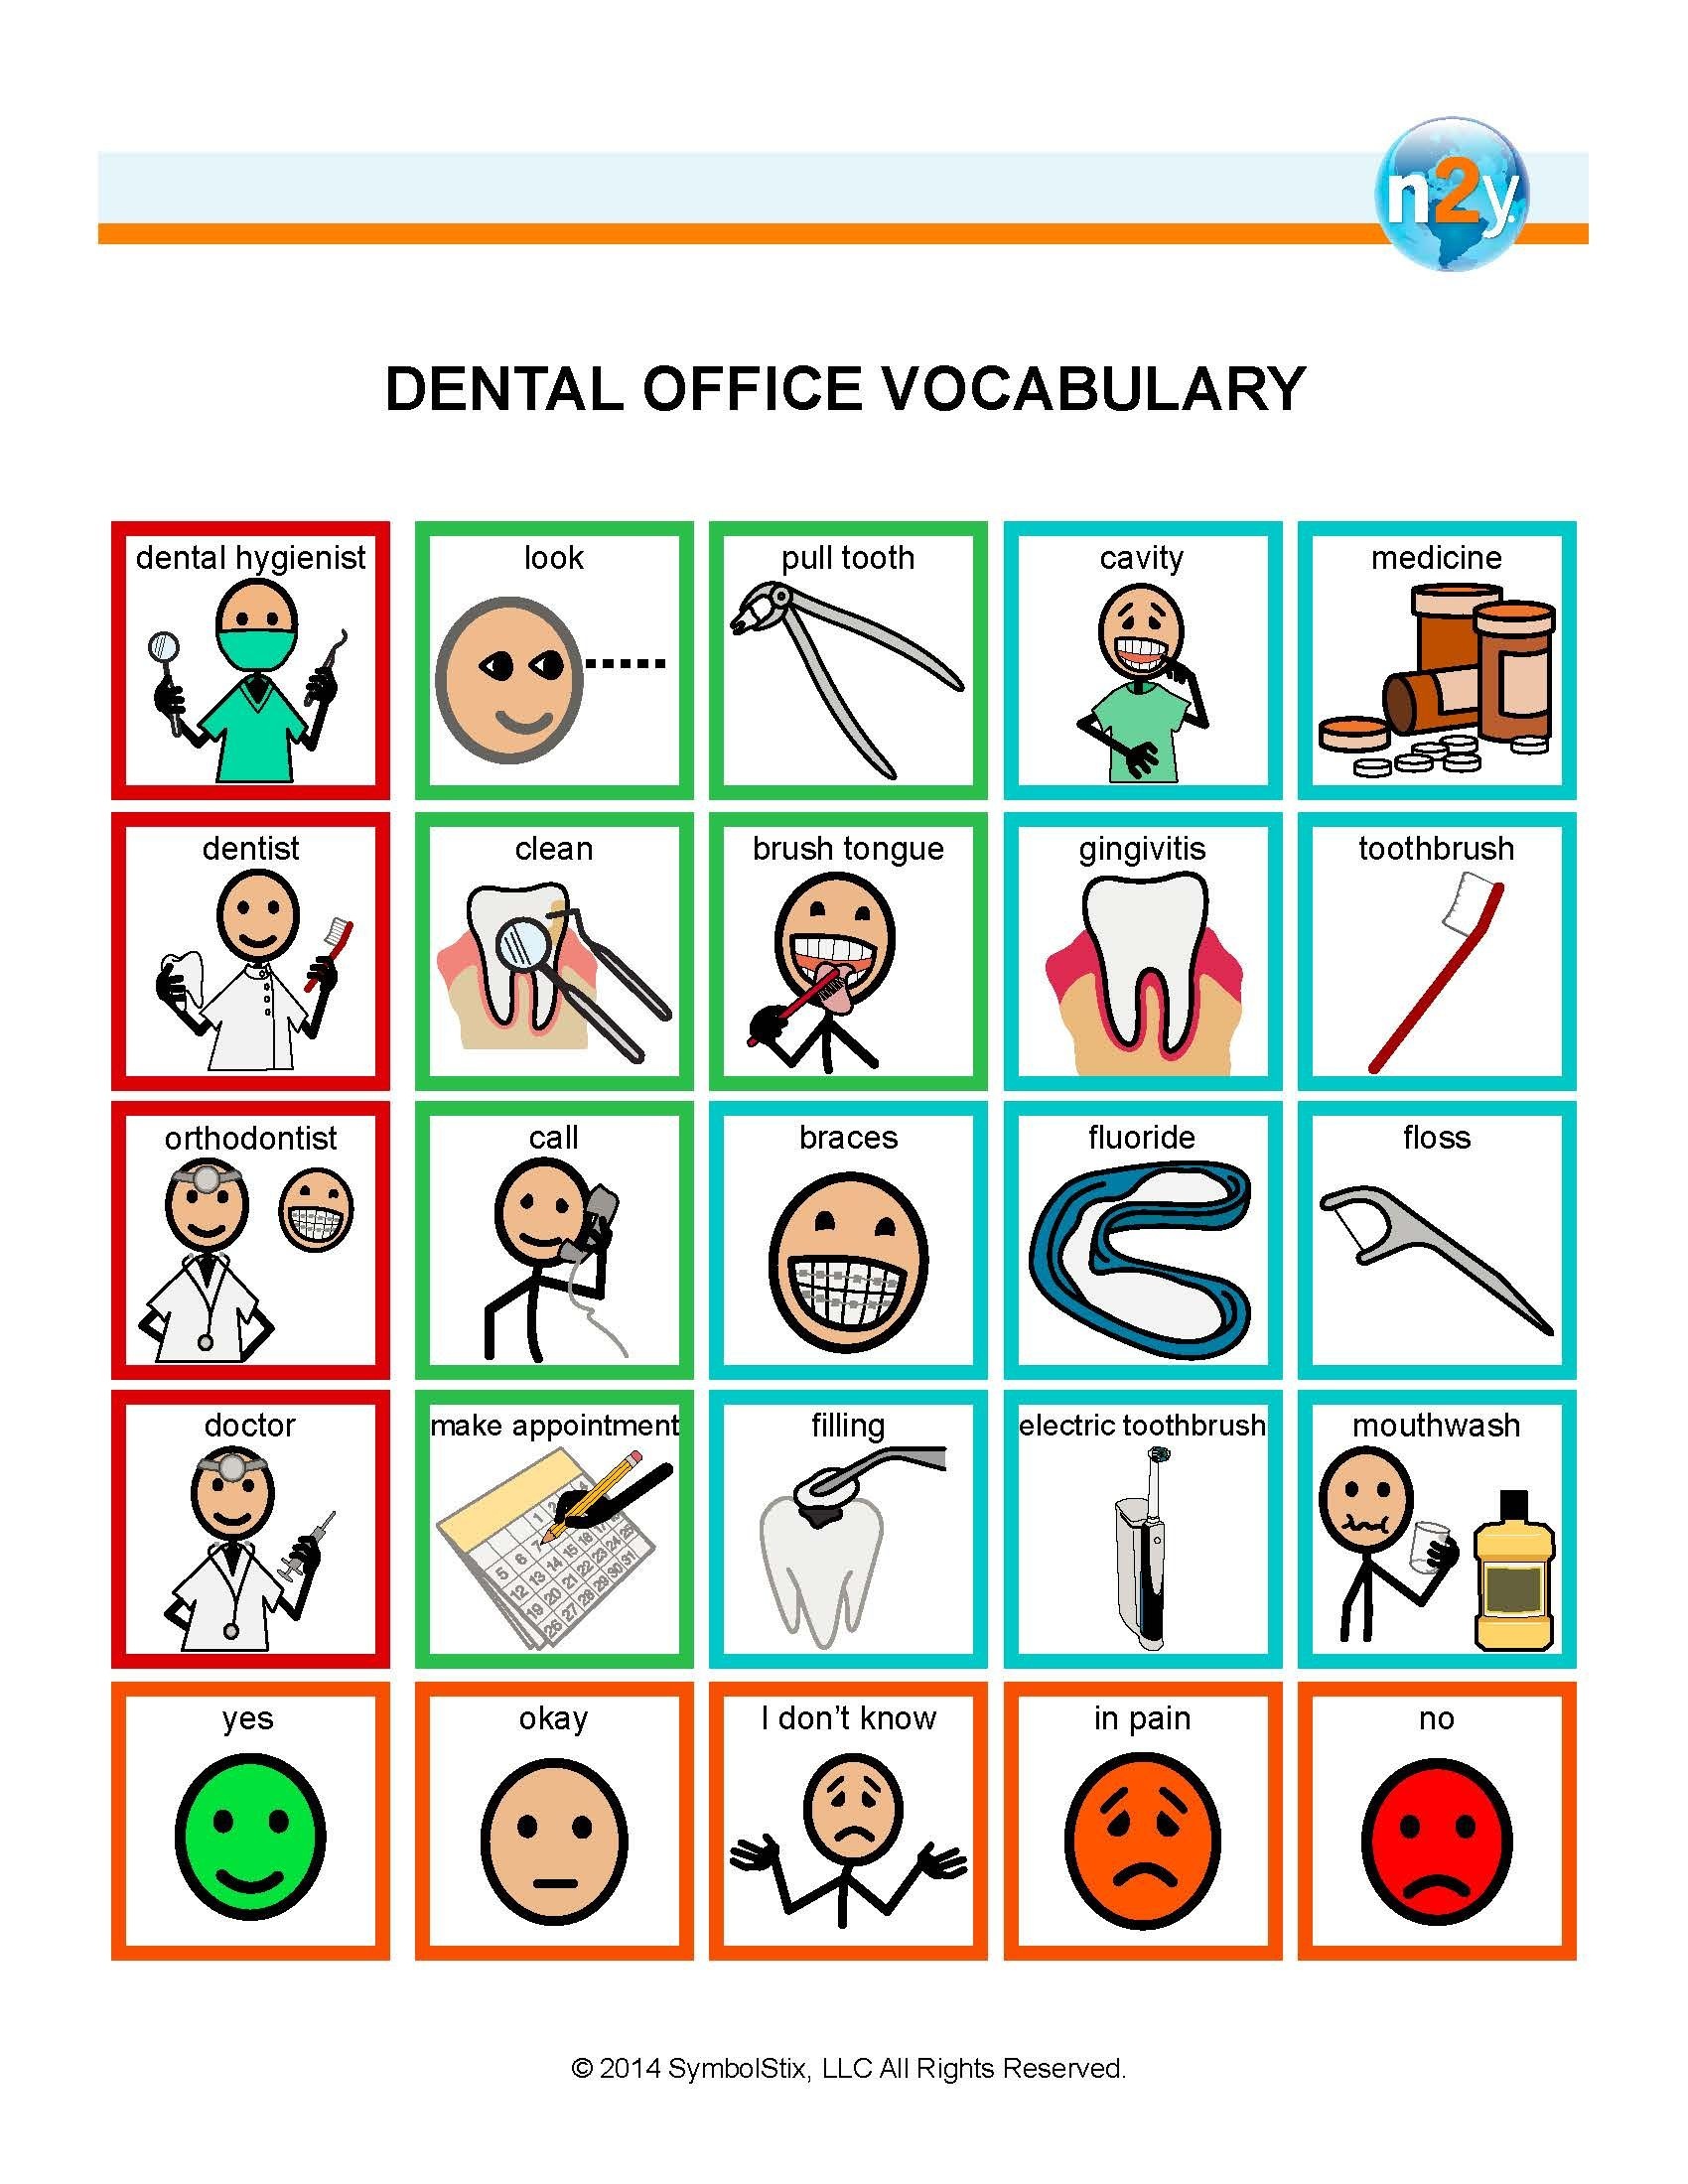 Dental Office Vocabulary For Better Understanding And Communication - Free Printable Widgit Symbols